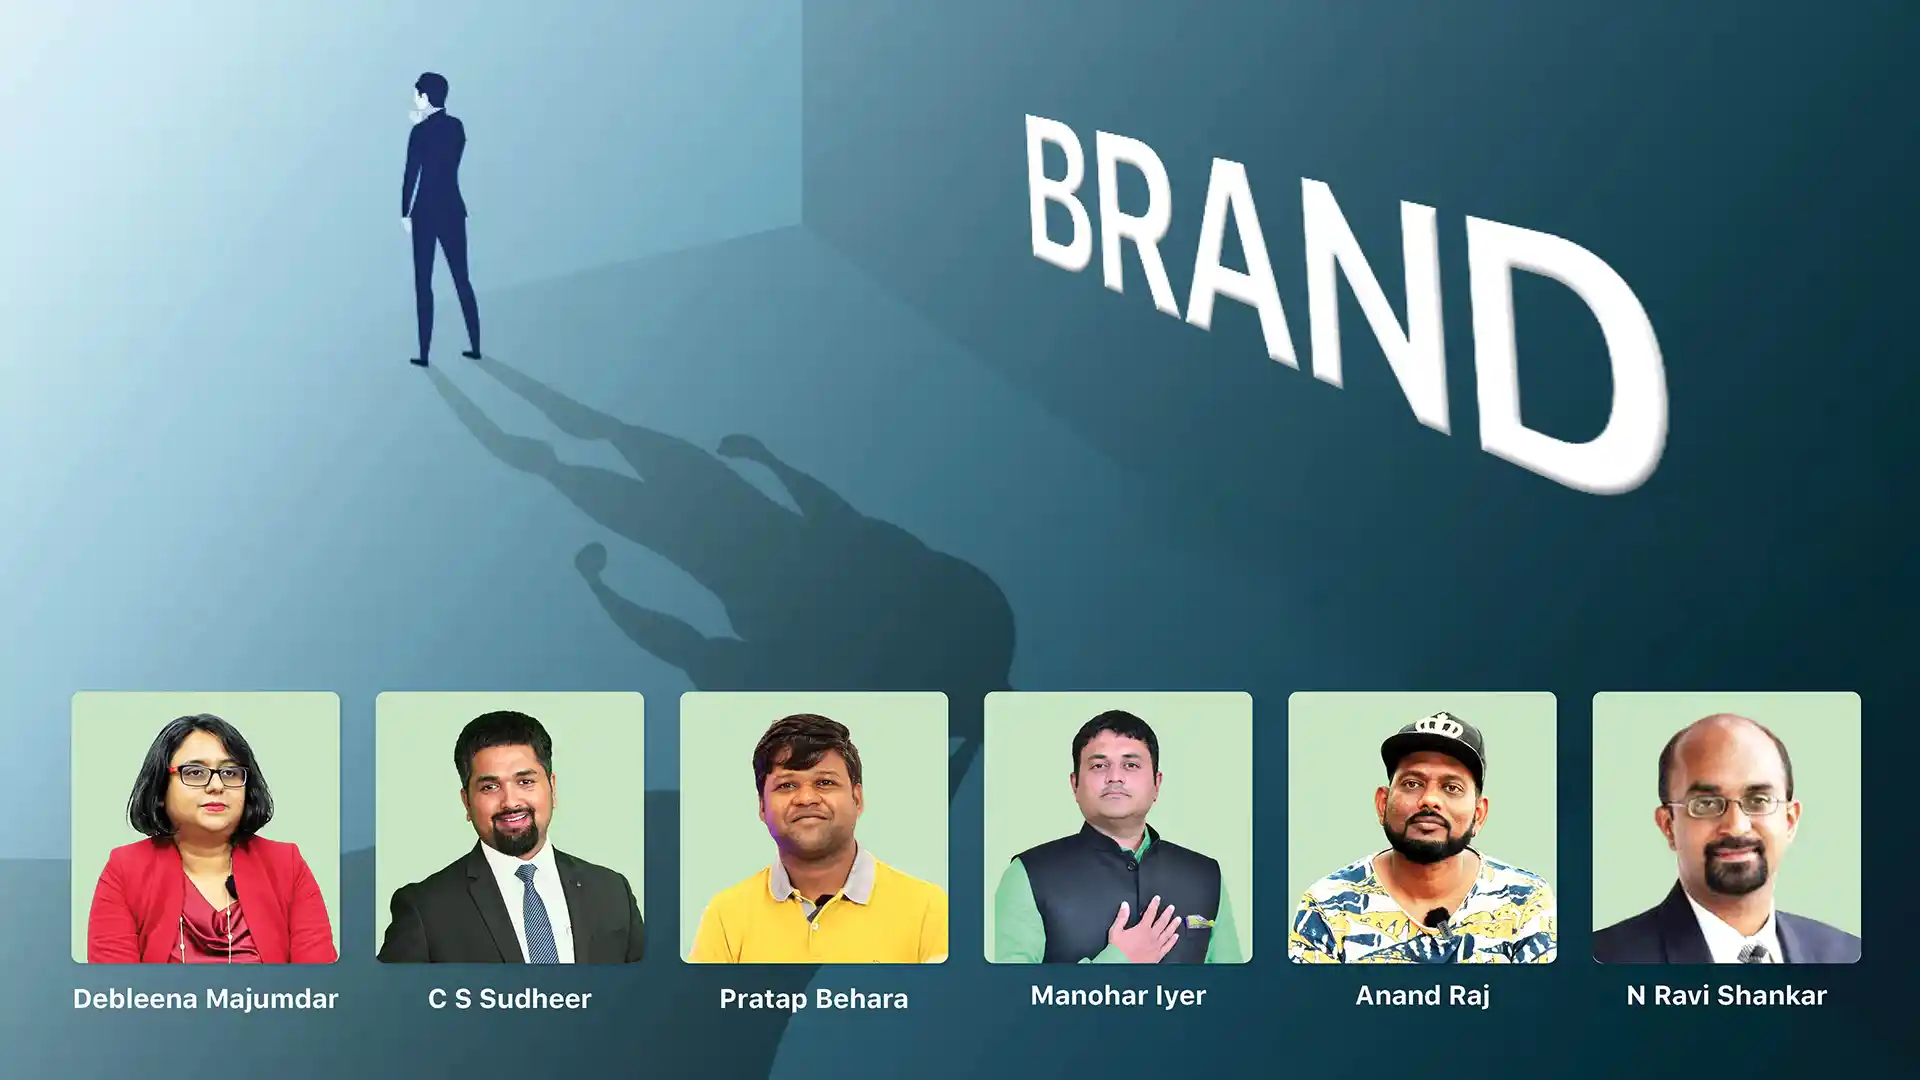 Course Trailer: From a Business to a Brand. Watch to know more.